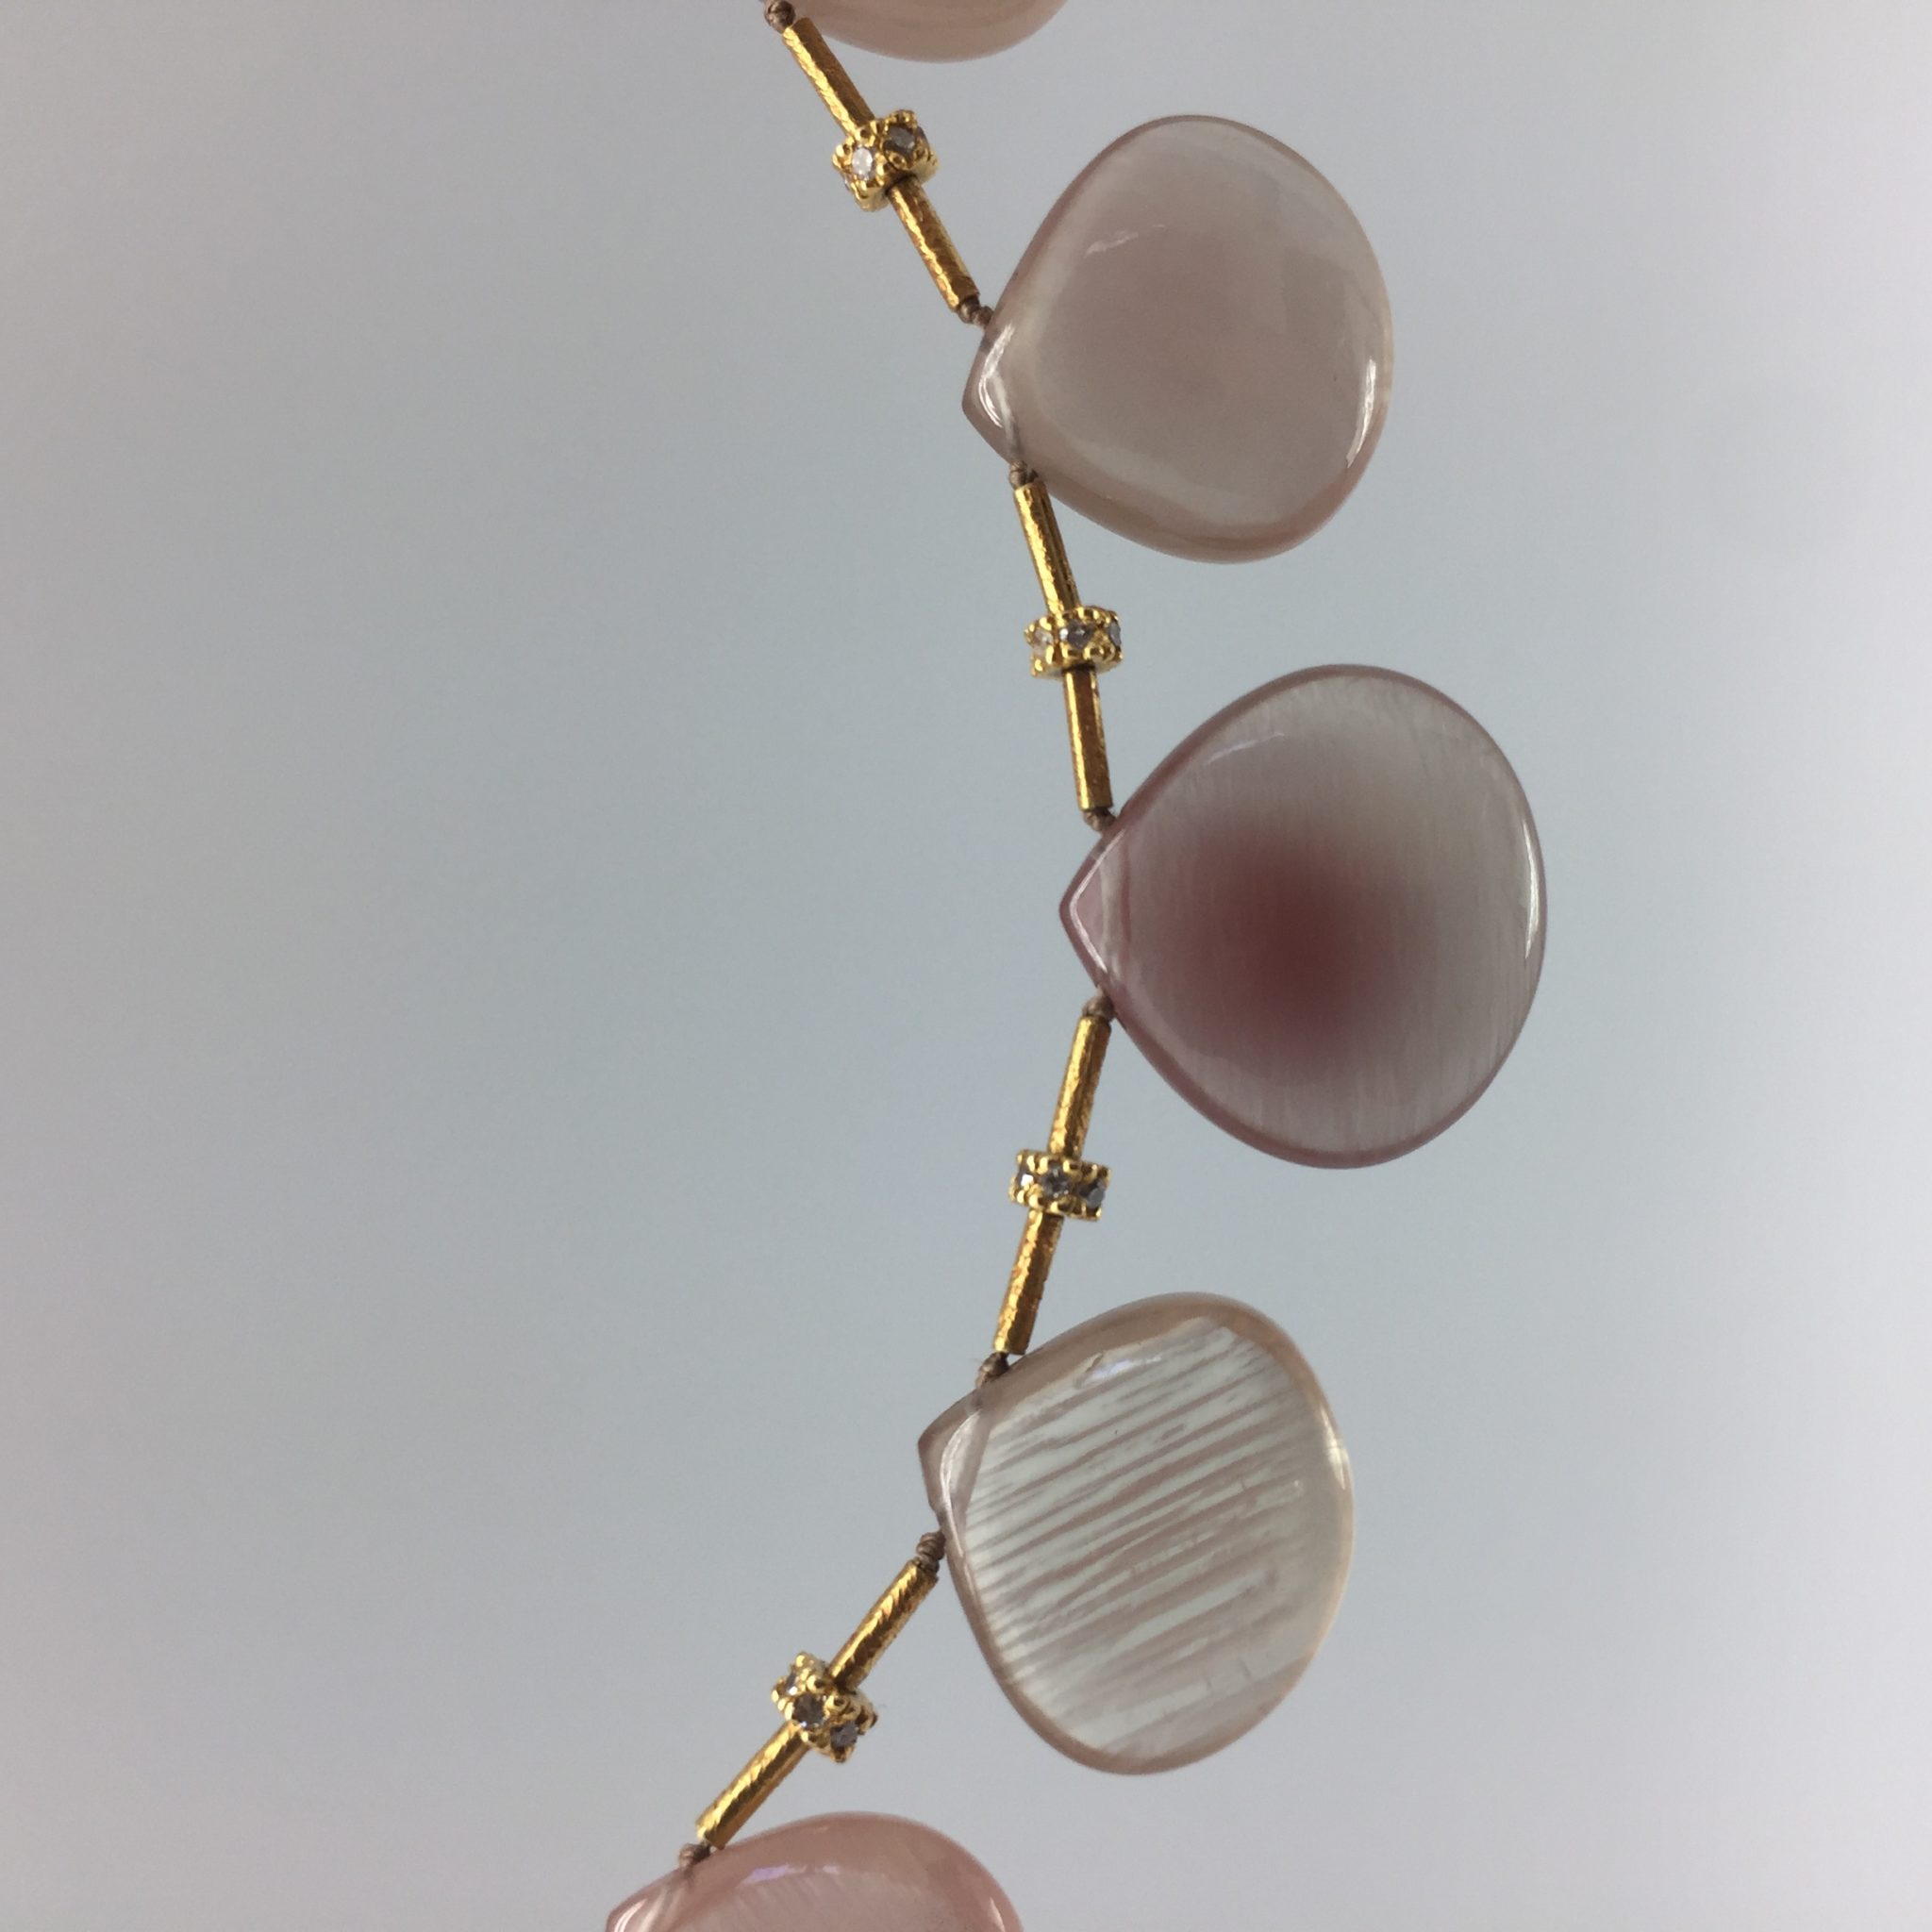 Daydreaming in Sunstones: Sunstone necklace of opaque smooth clam-shaped briolettes spaced with 18K gold tubes and 14K rondelle beads studded with diamonds. Item N00006 detail photo 02 closeup of stones